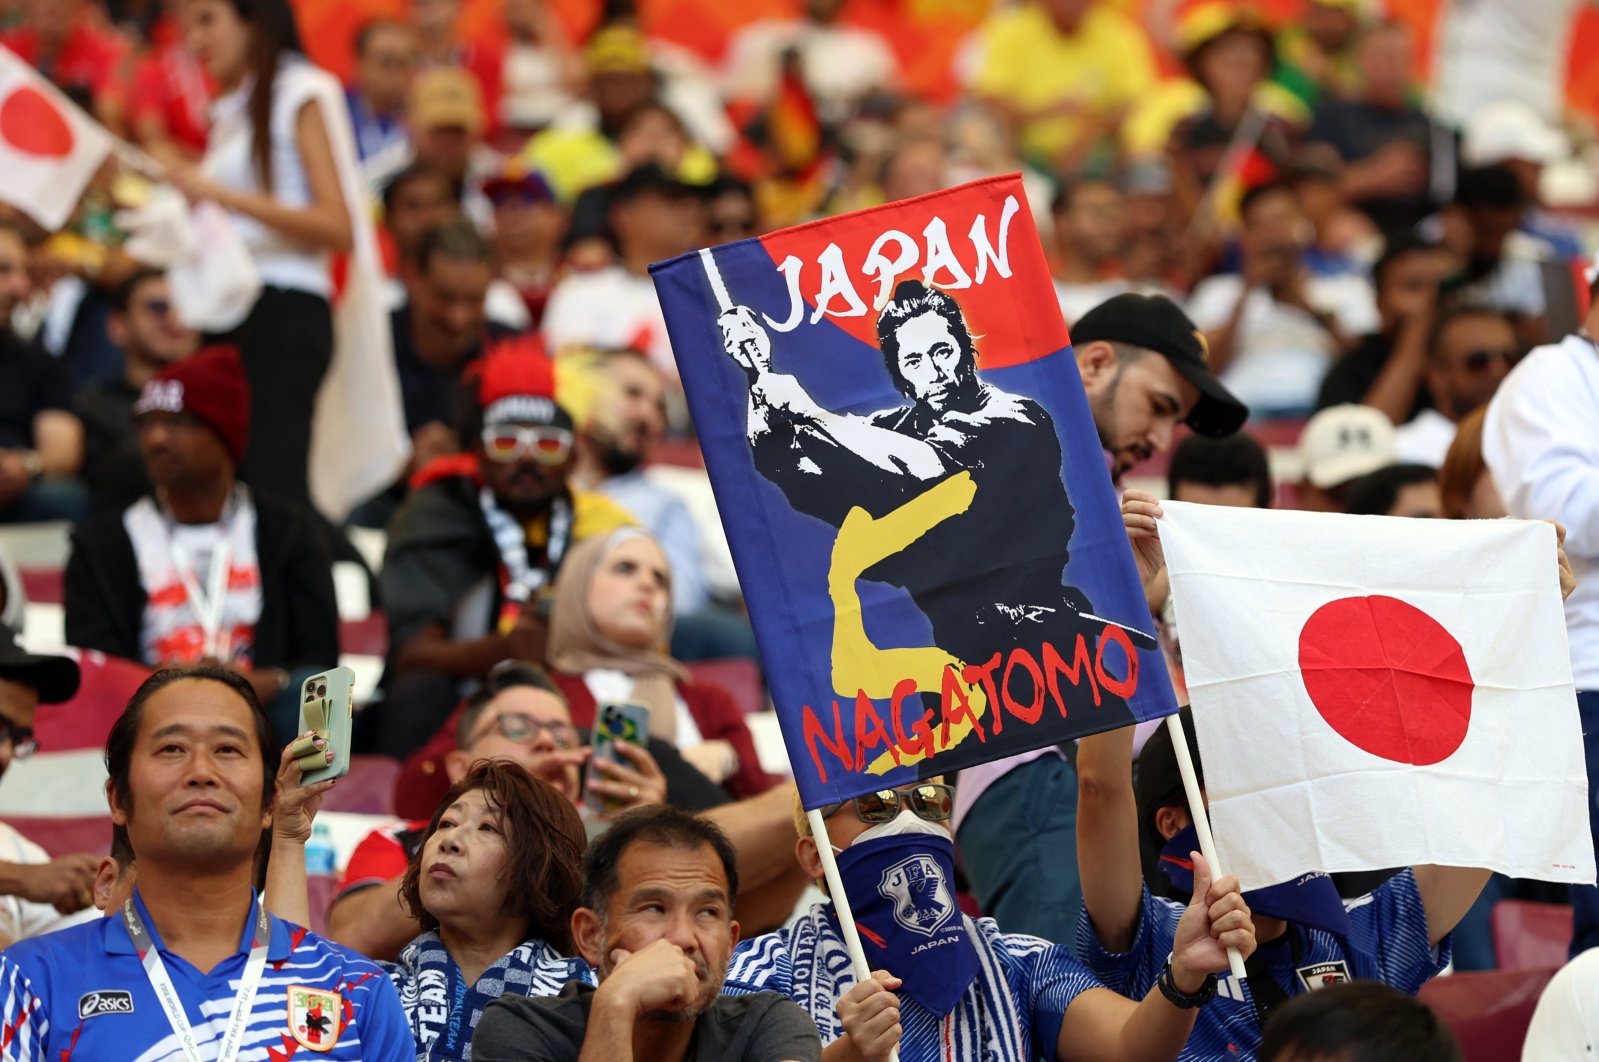 Japan fans display a banner inside the stadium before their team&#039;s World Cup match, Doha, Qatar, Nov. 23, 2022. (Reuters Photo)